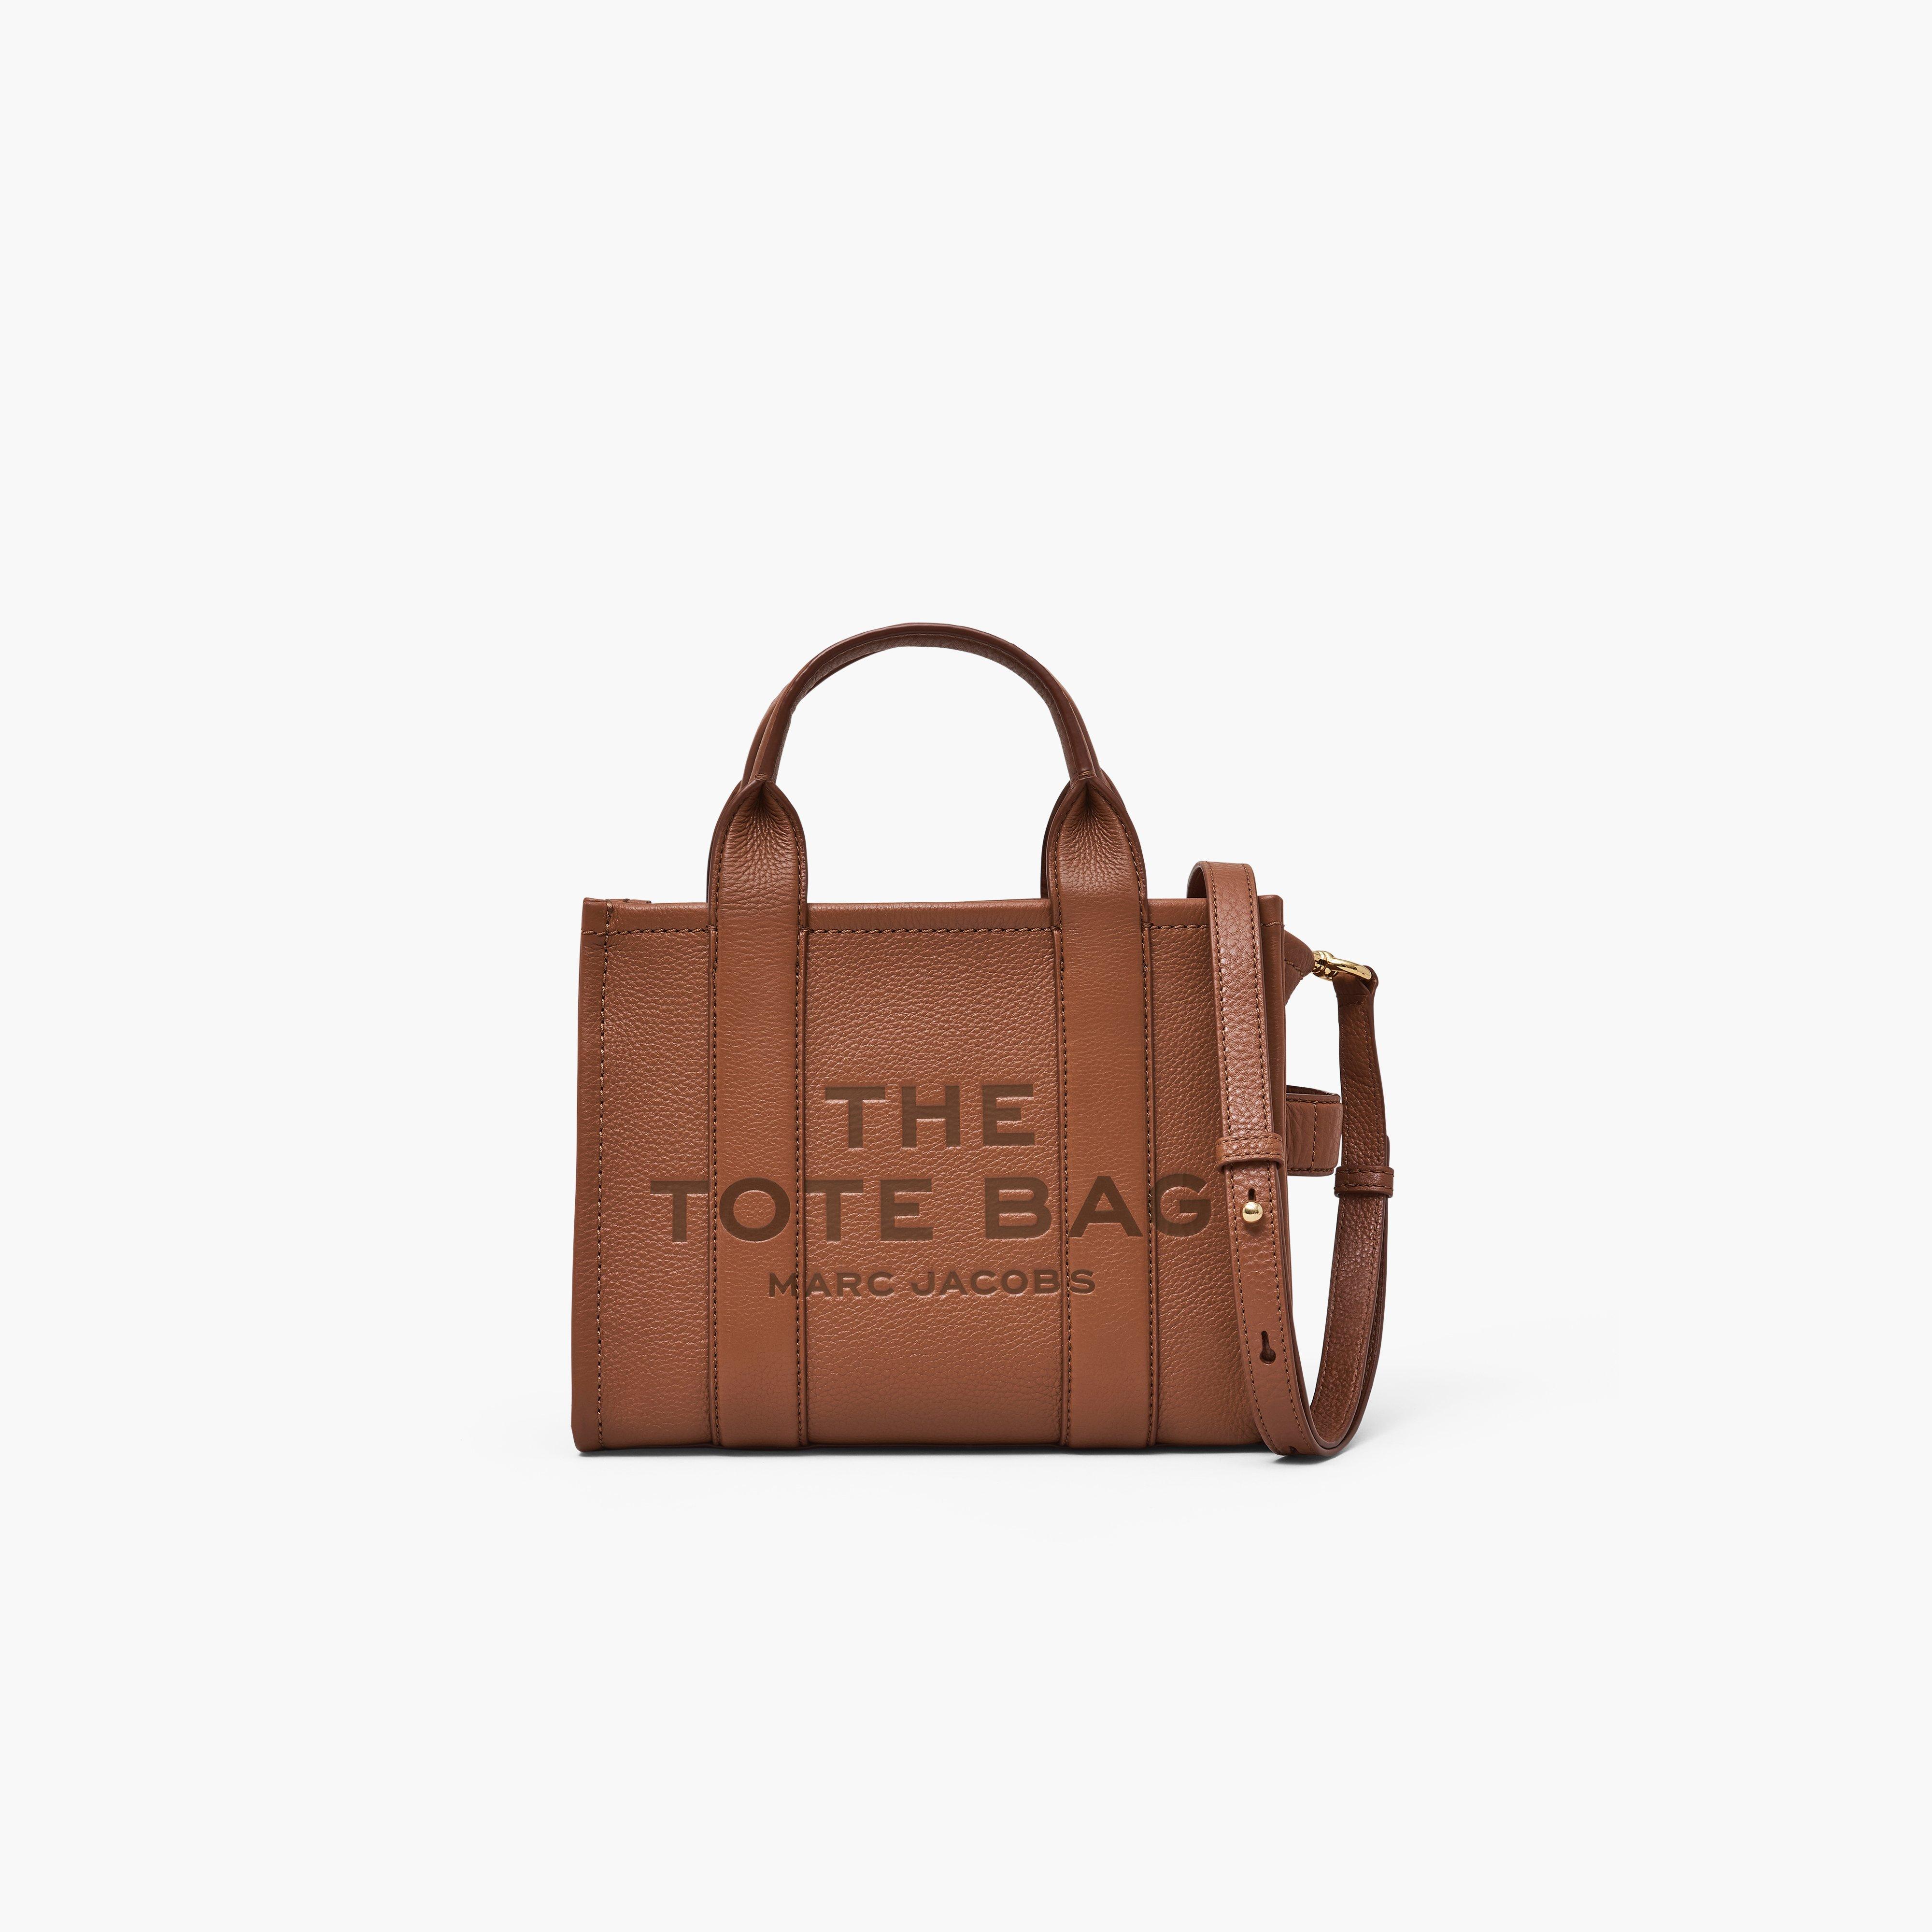 Marc by Marc jacobs The Leather Small Tote Bag,ARGAN OIL